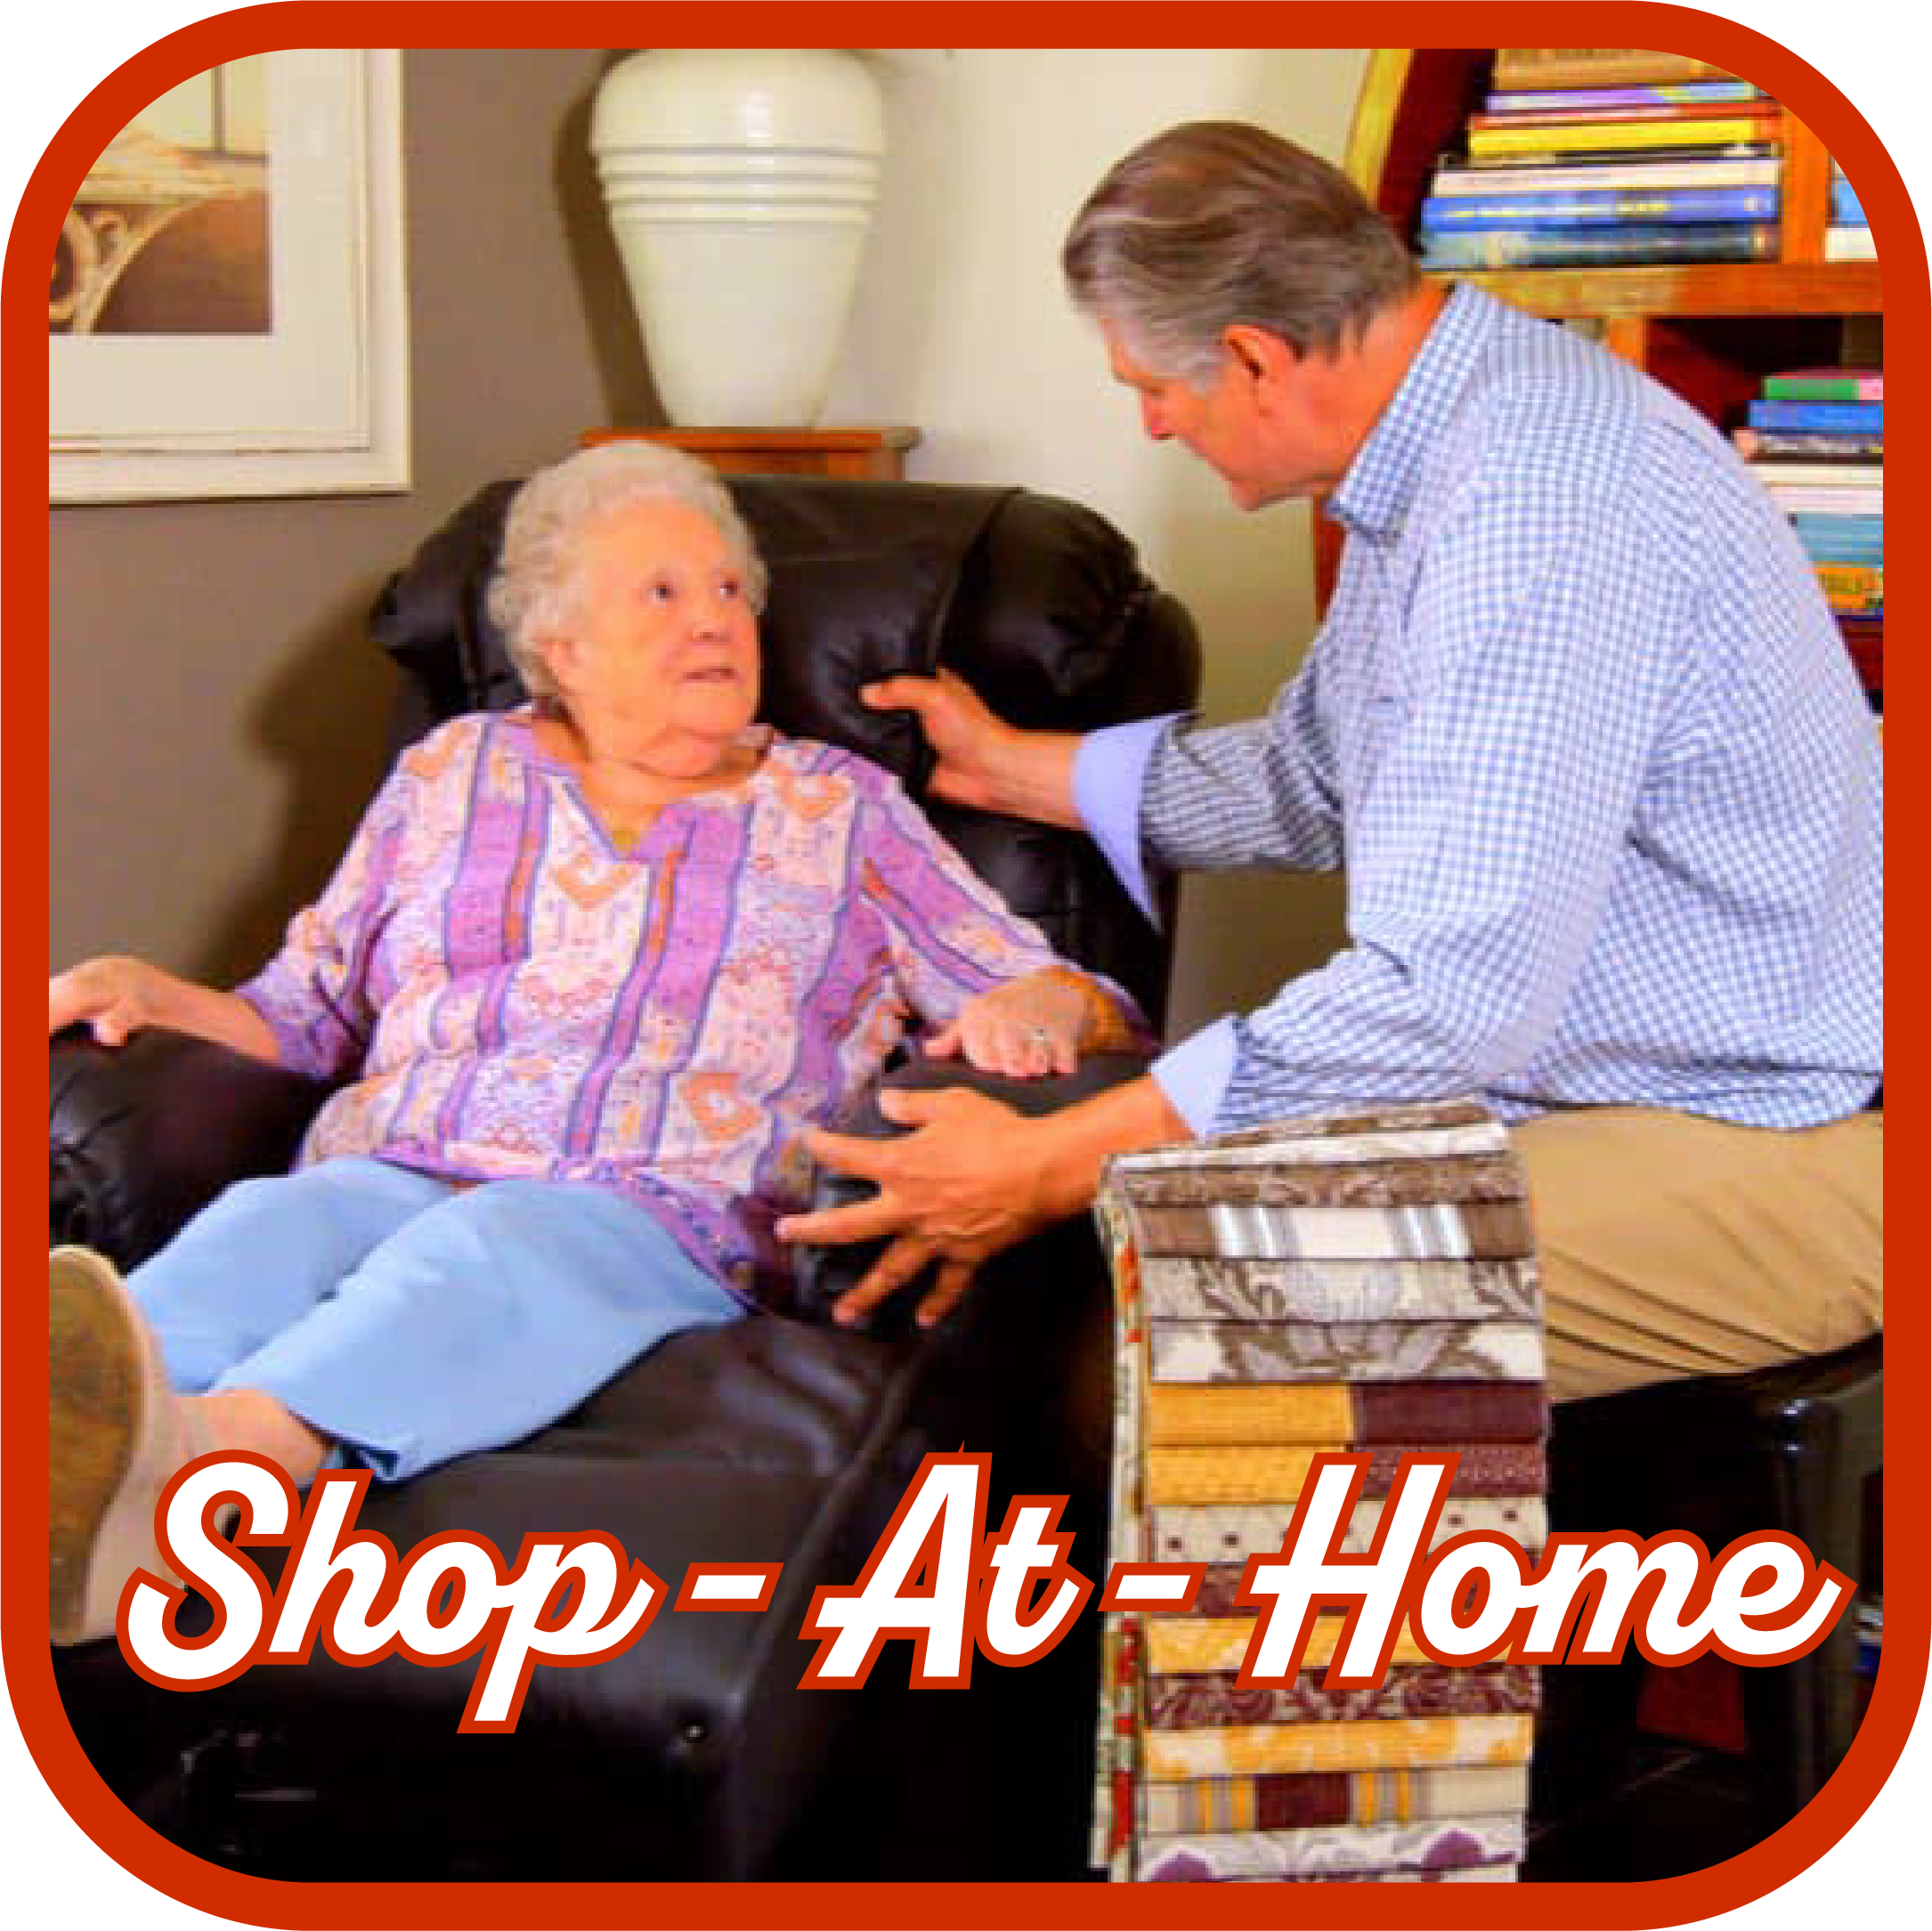 We bring the lift chairs to you with our shop-at-home option.